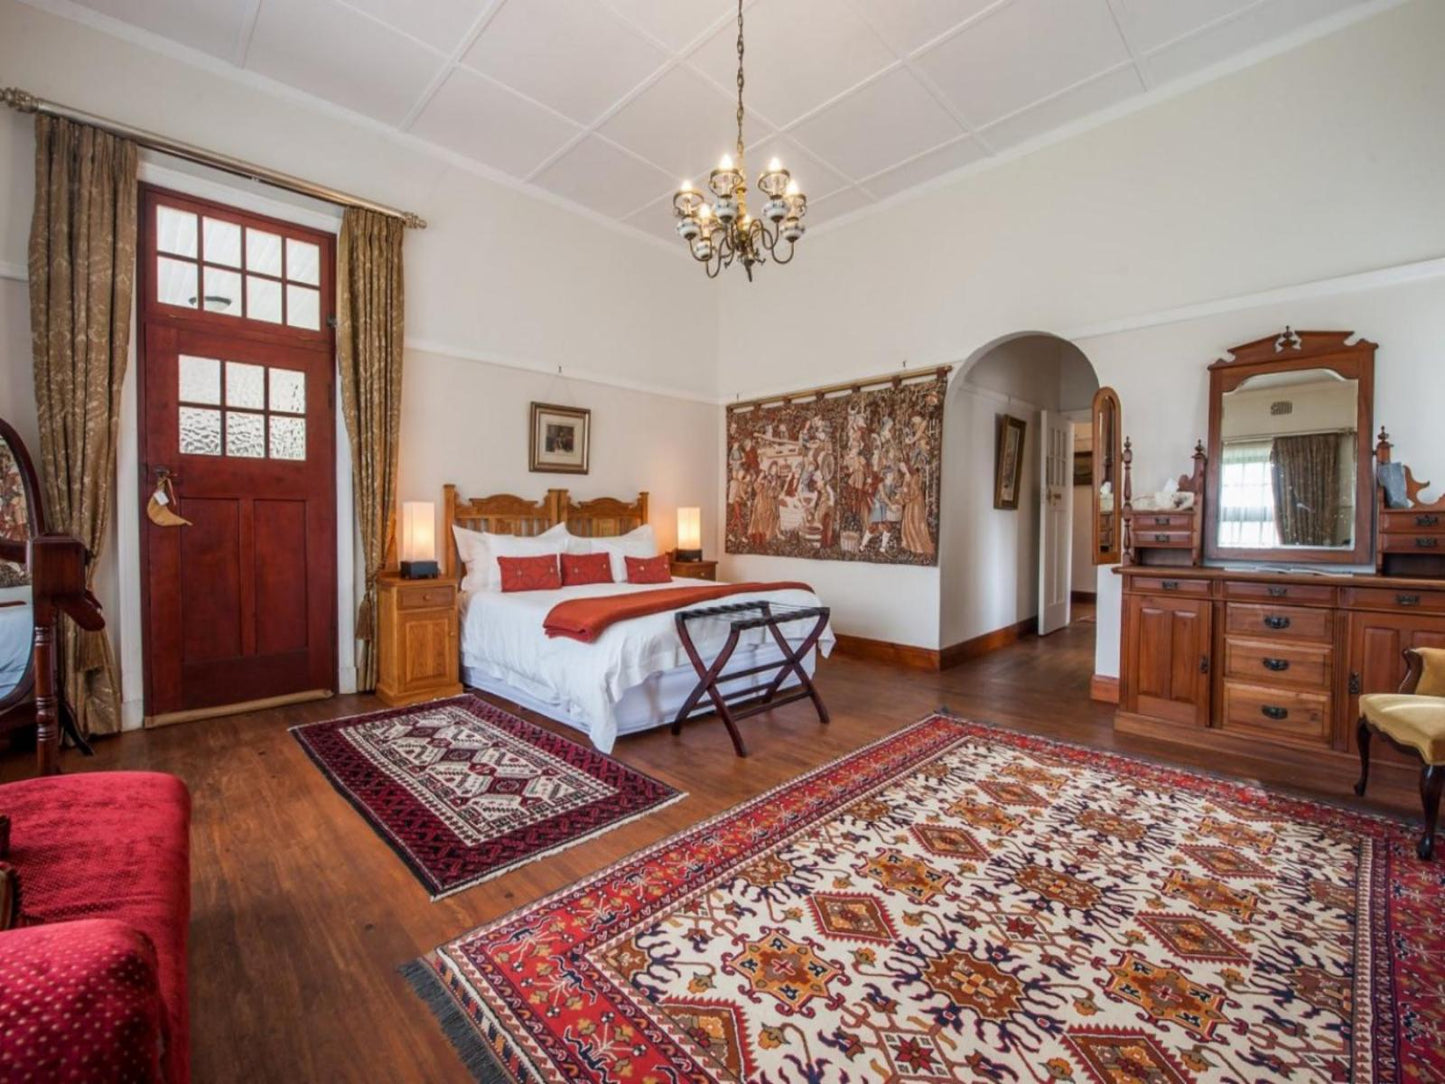 Luxury Double Room @ Excelsior Manor Guesthouse